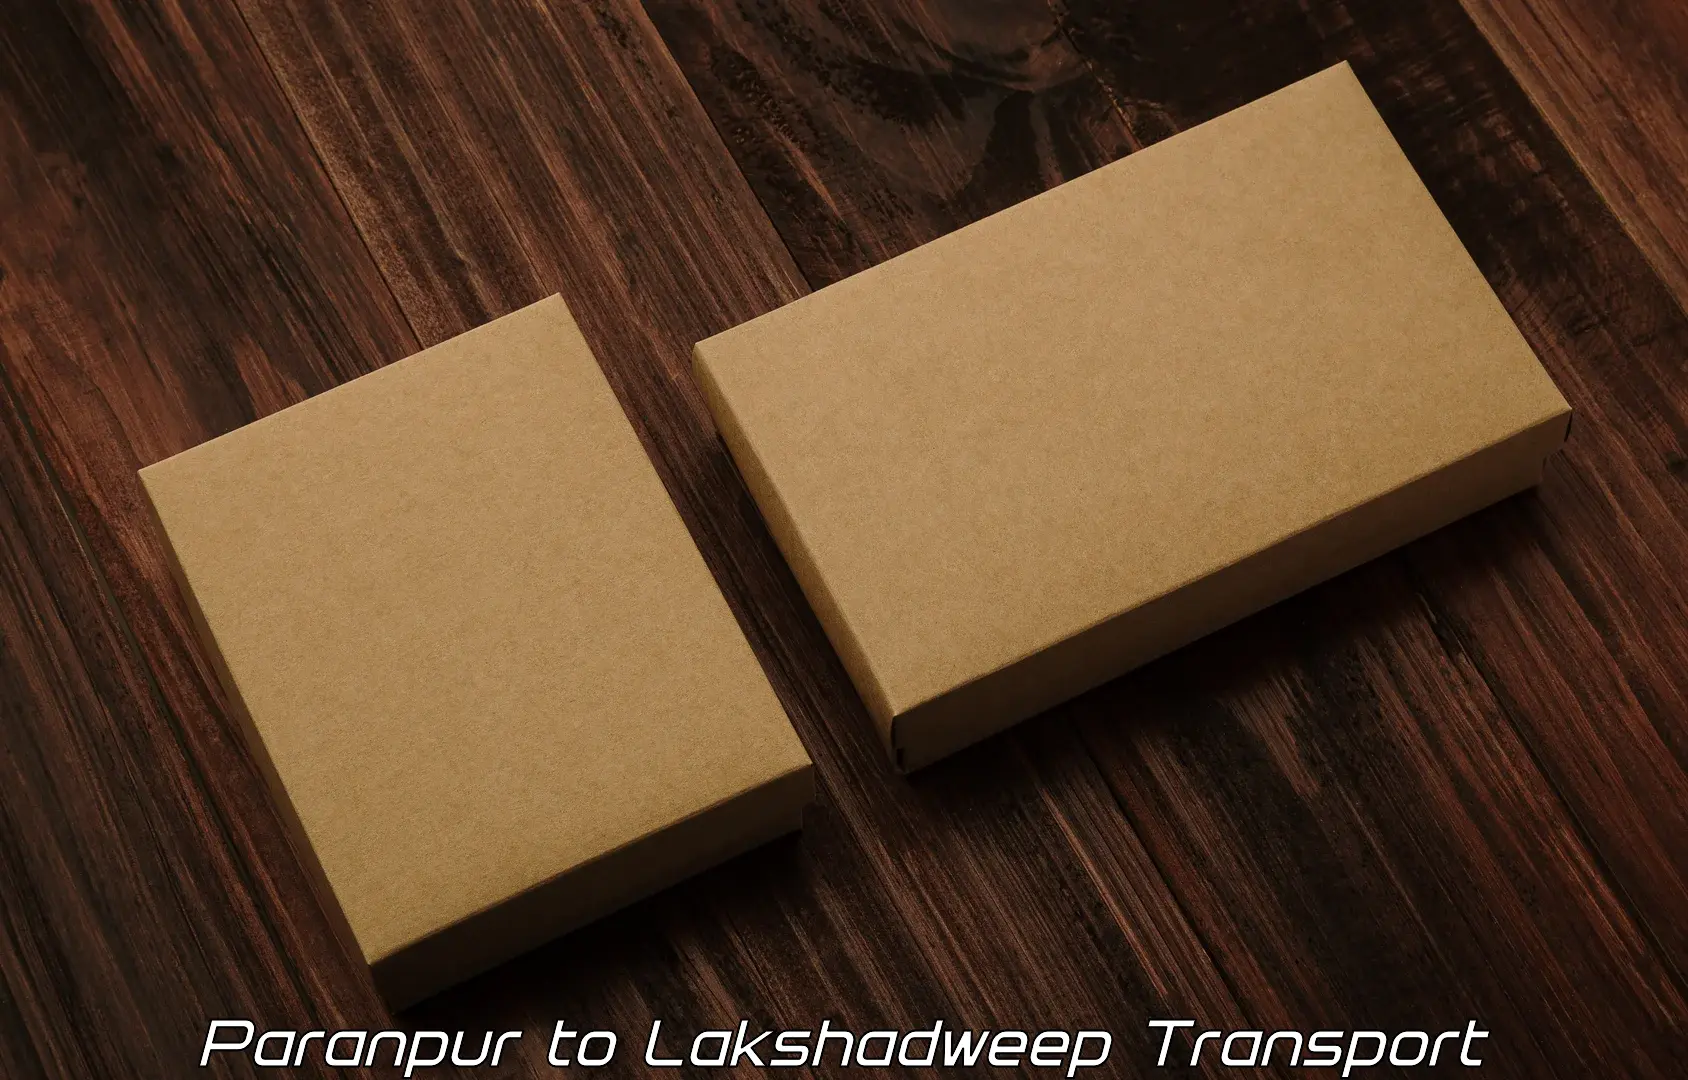 Road transport services Paranpur to Lakshadweep